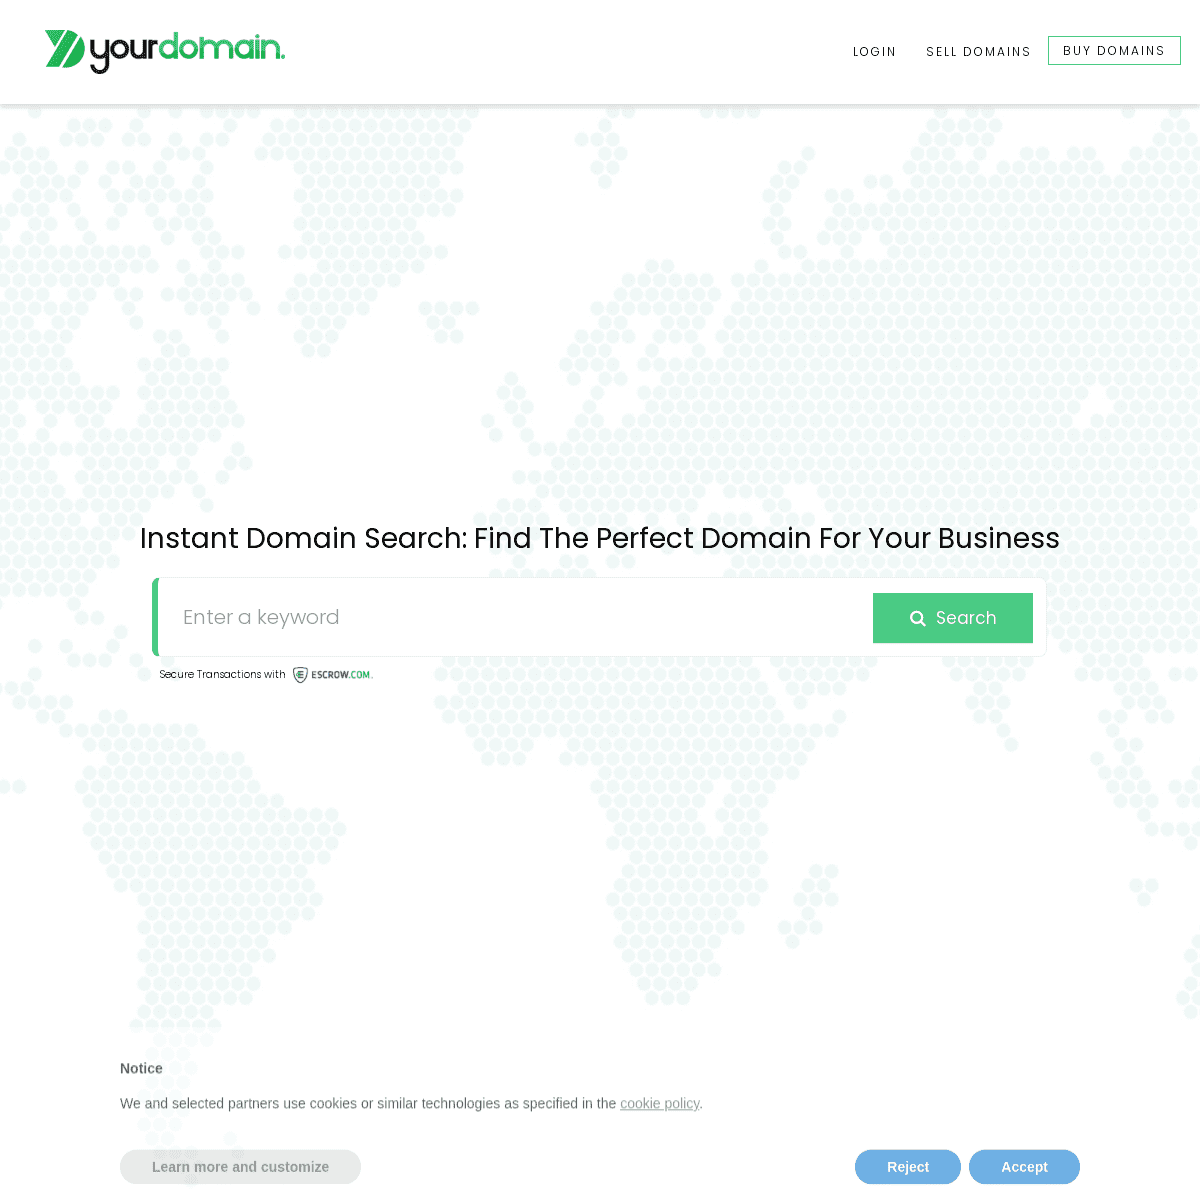 A complete backup of https://yourdomain.net